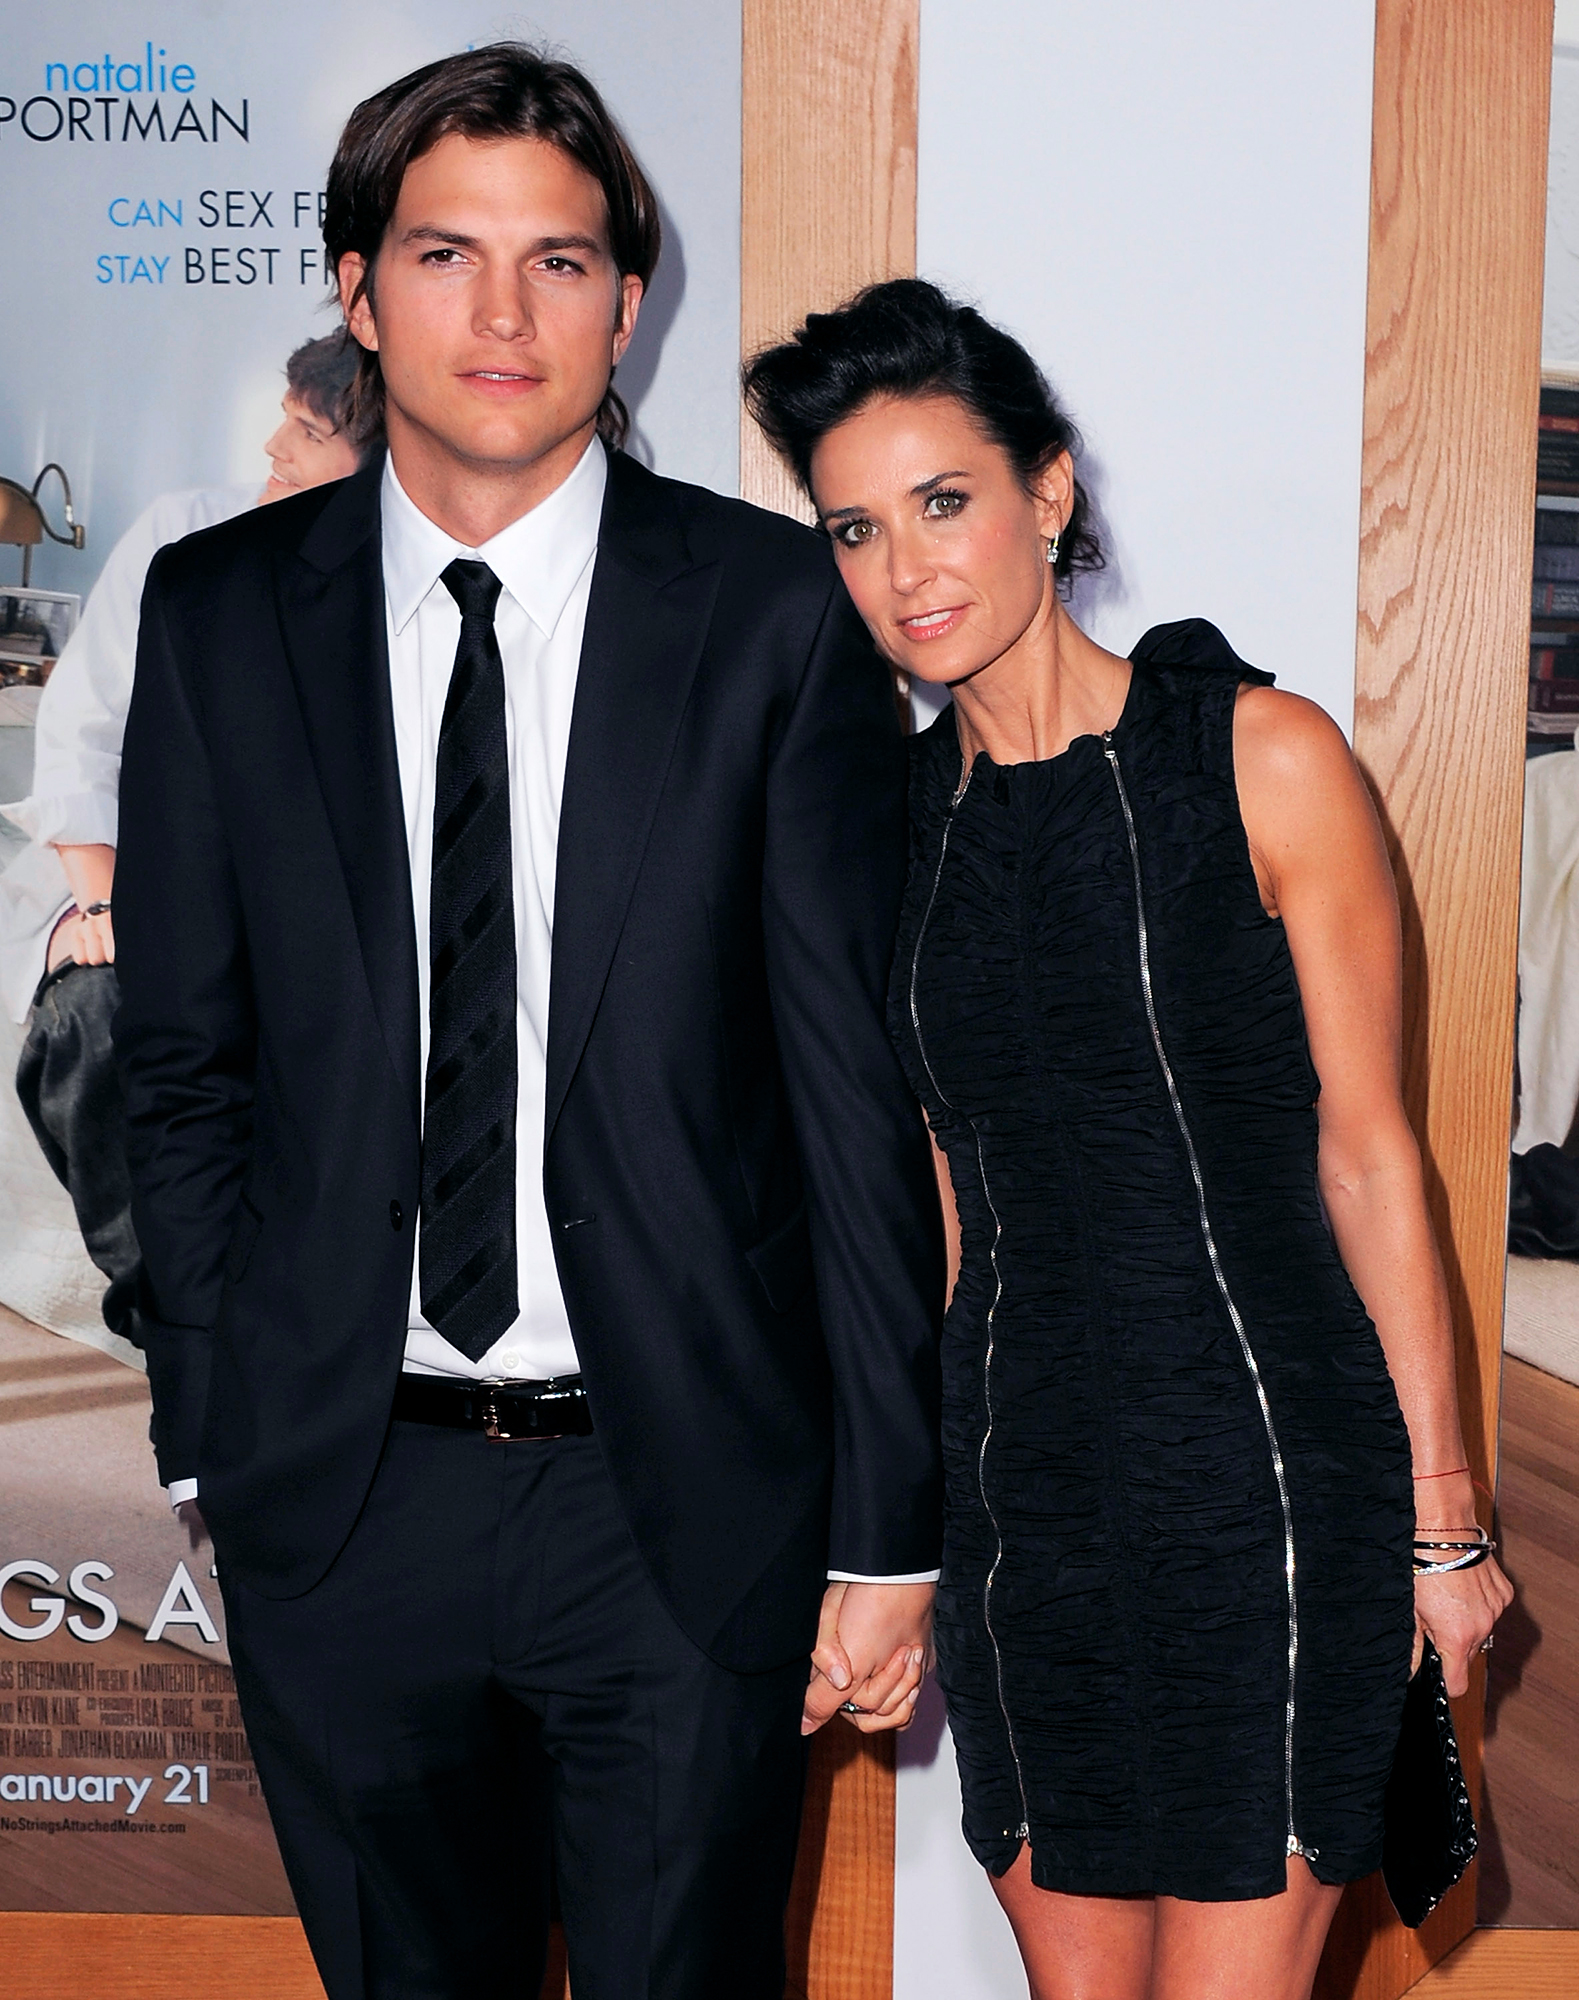 Demi Moore on Current Relationship With Ex-Husband Ashton Kutcher pic